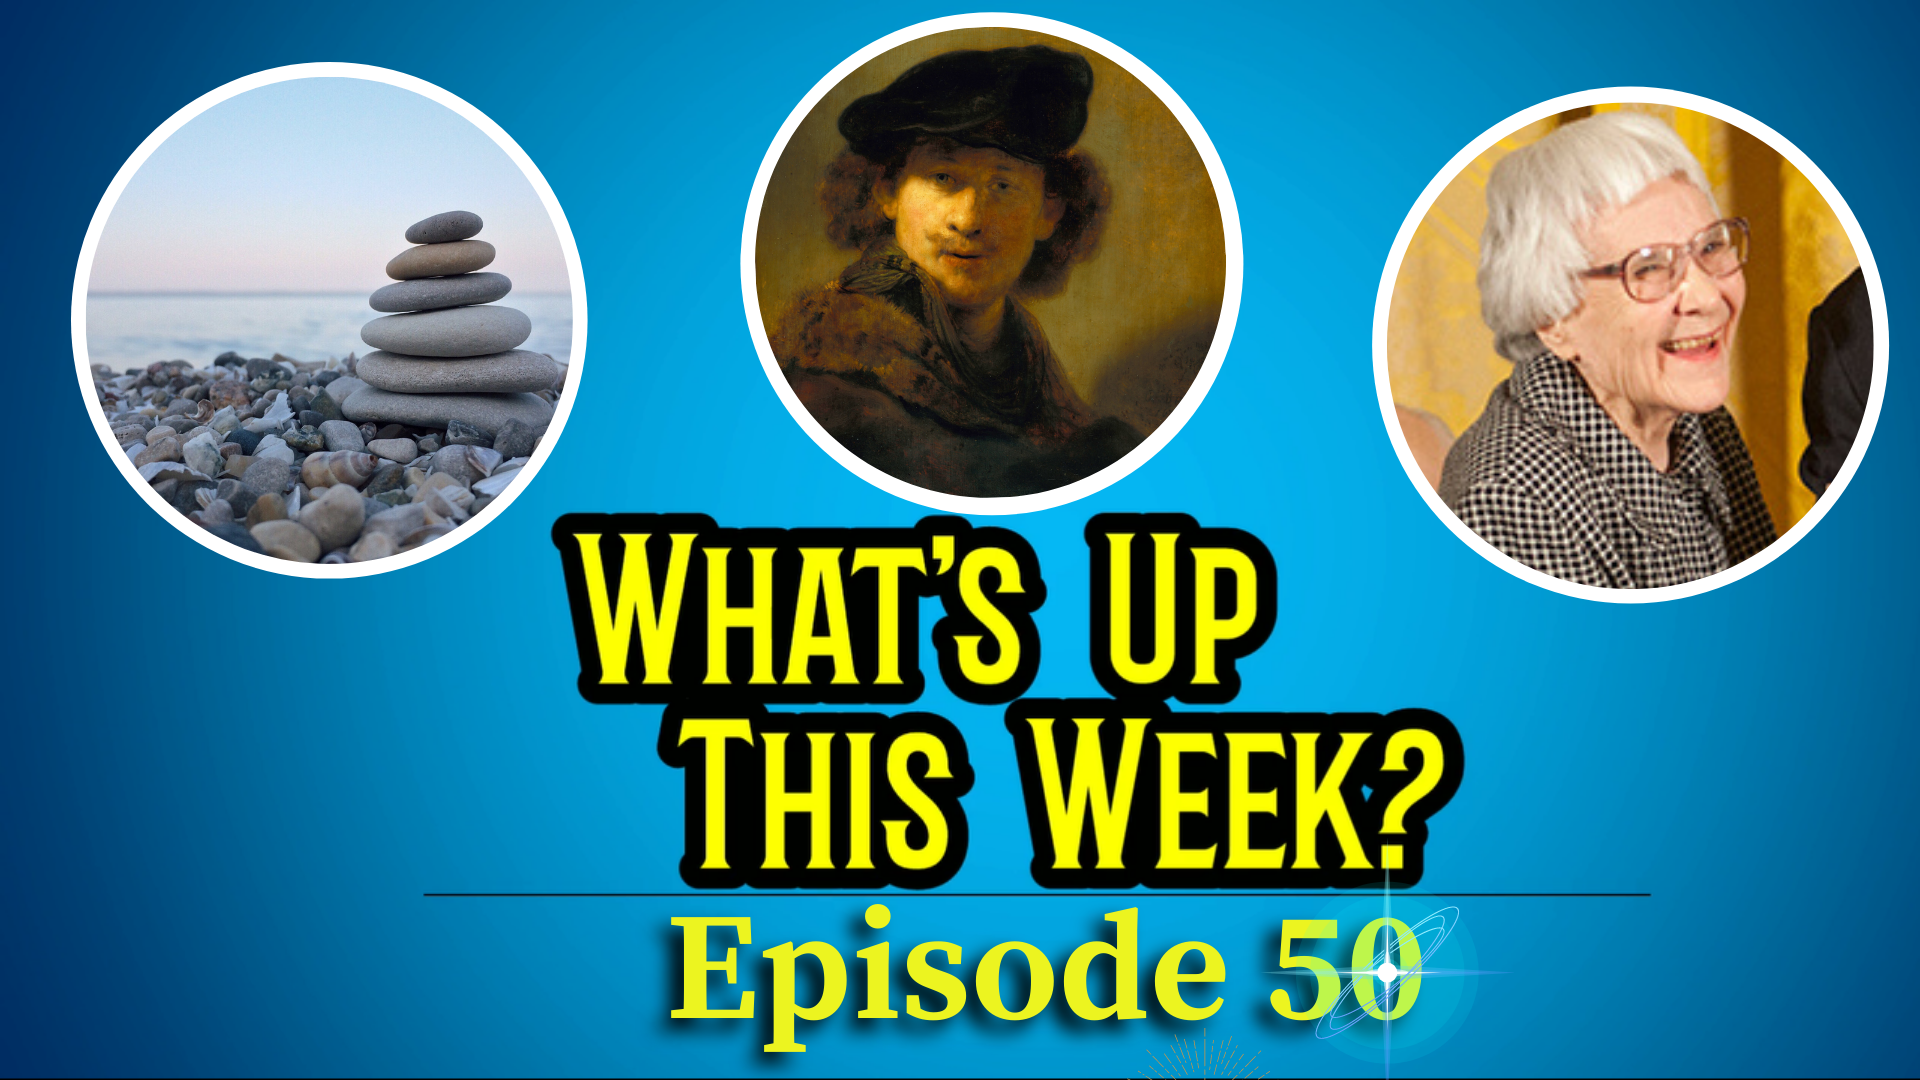 Text: What's Up This Week? Episode 50. 3 images in circles: stacked rocks on a beach, the artist Rembrandt, and author Harper Lee.